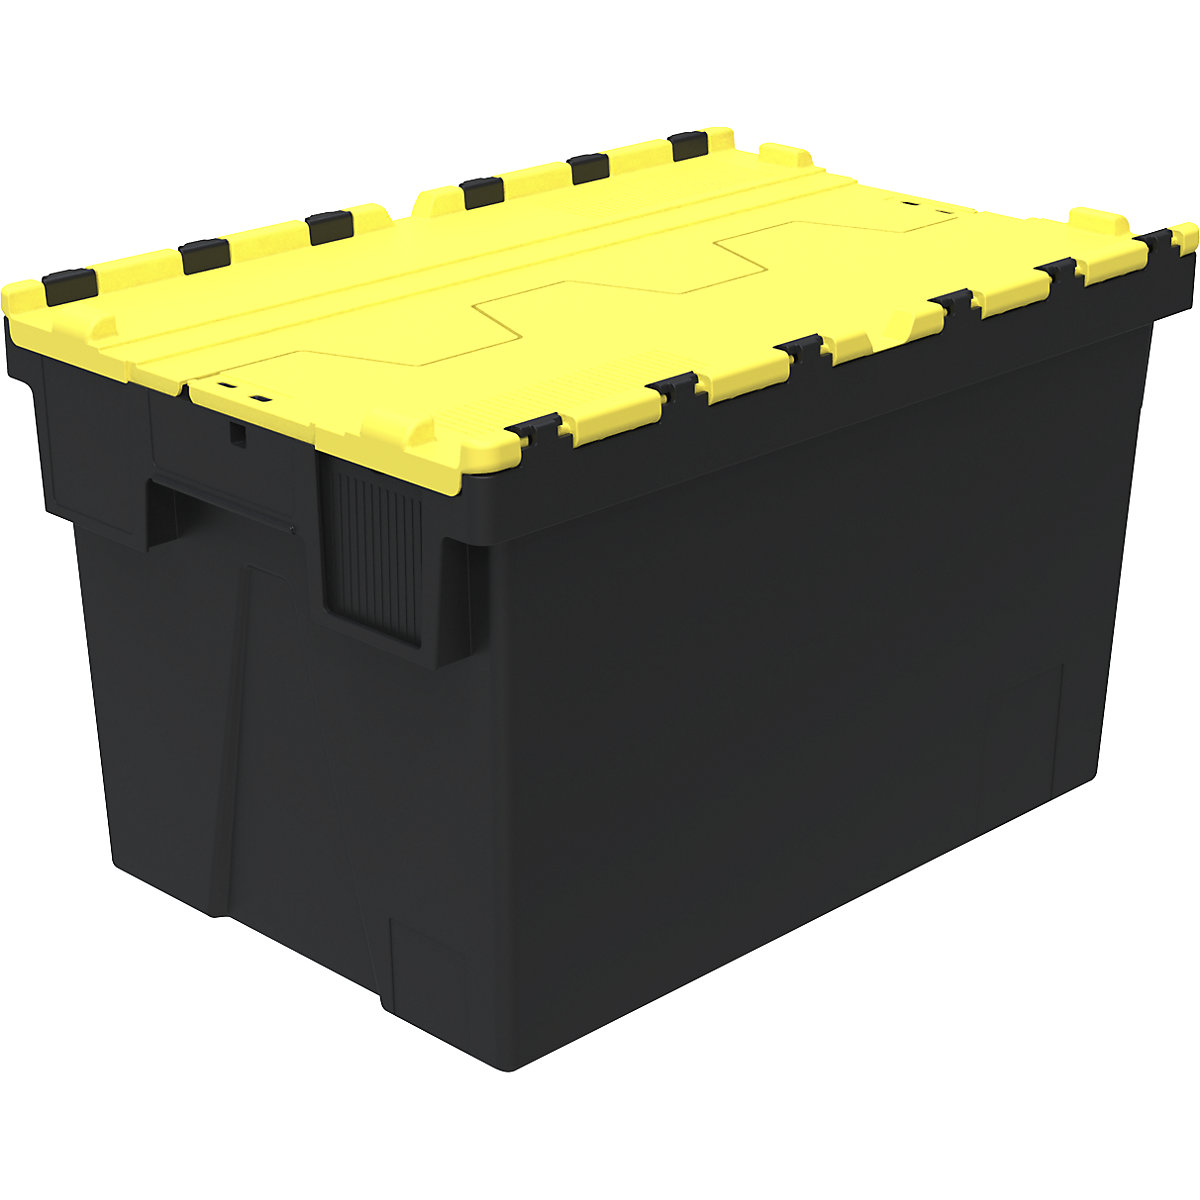 Reusable stacking container, LxWxH 600 x 400 x 367 mm, black/yellow-3